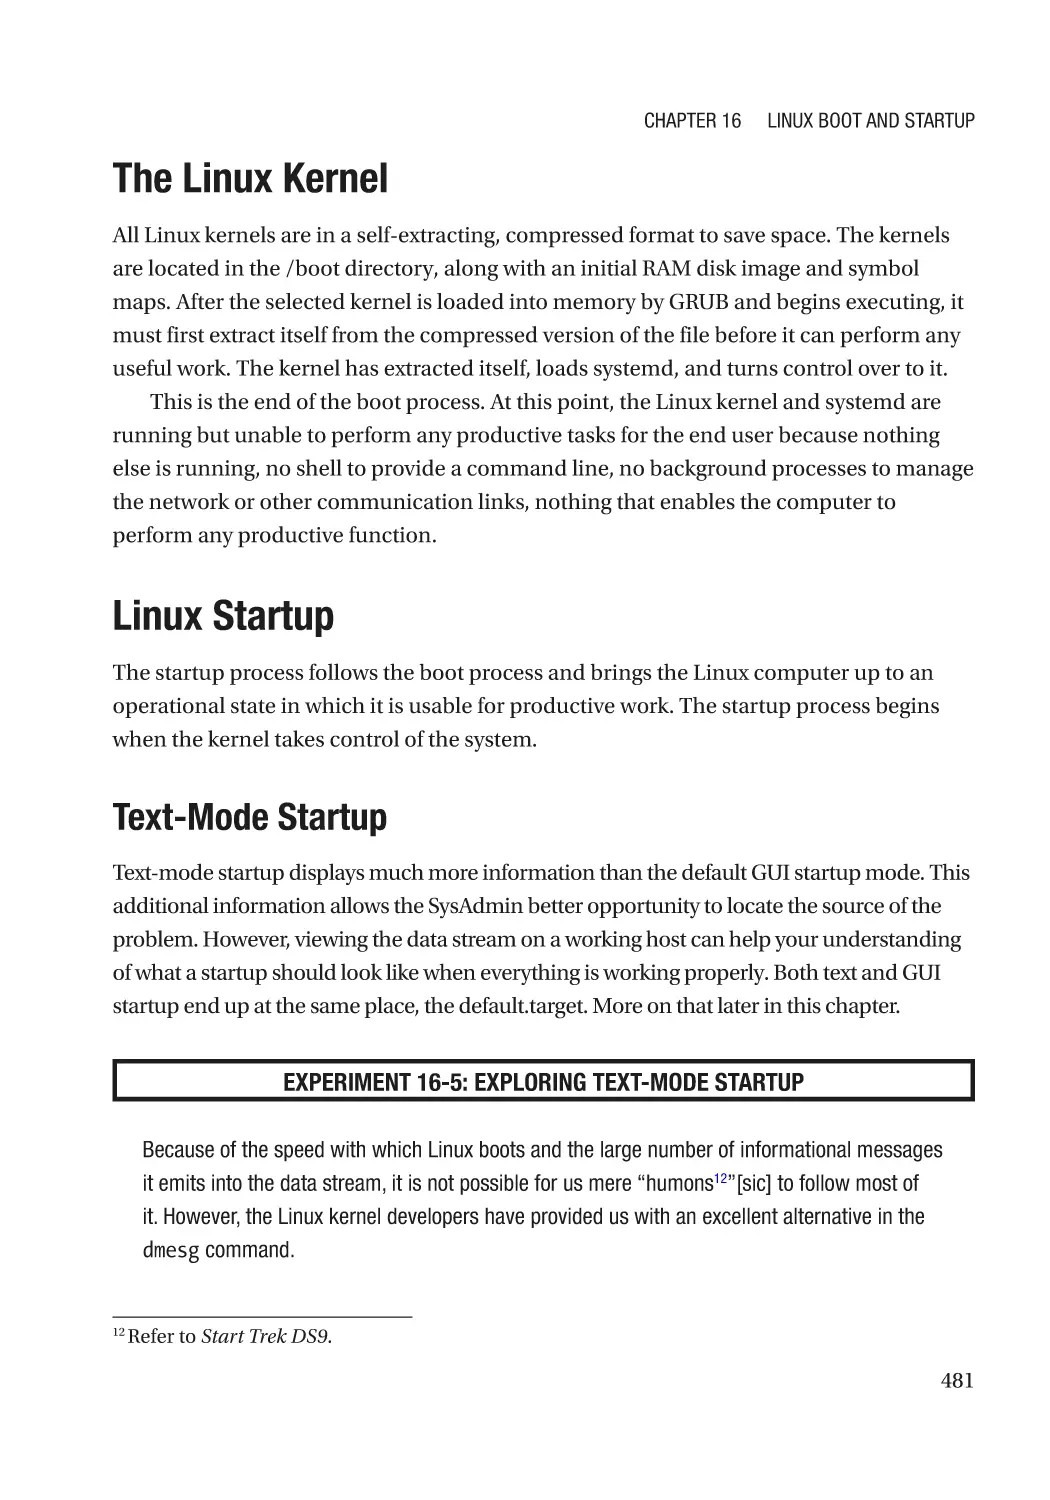 The Linux Kernel
Linux Startup
Text-Mode Startup